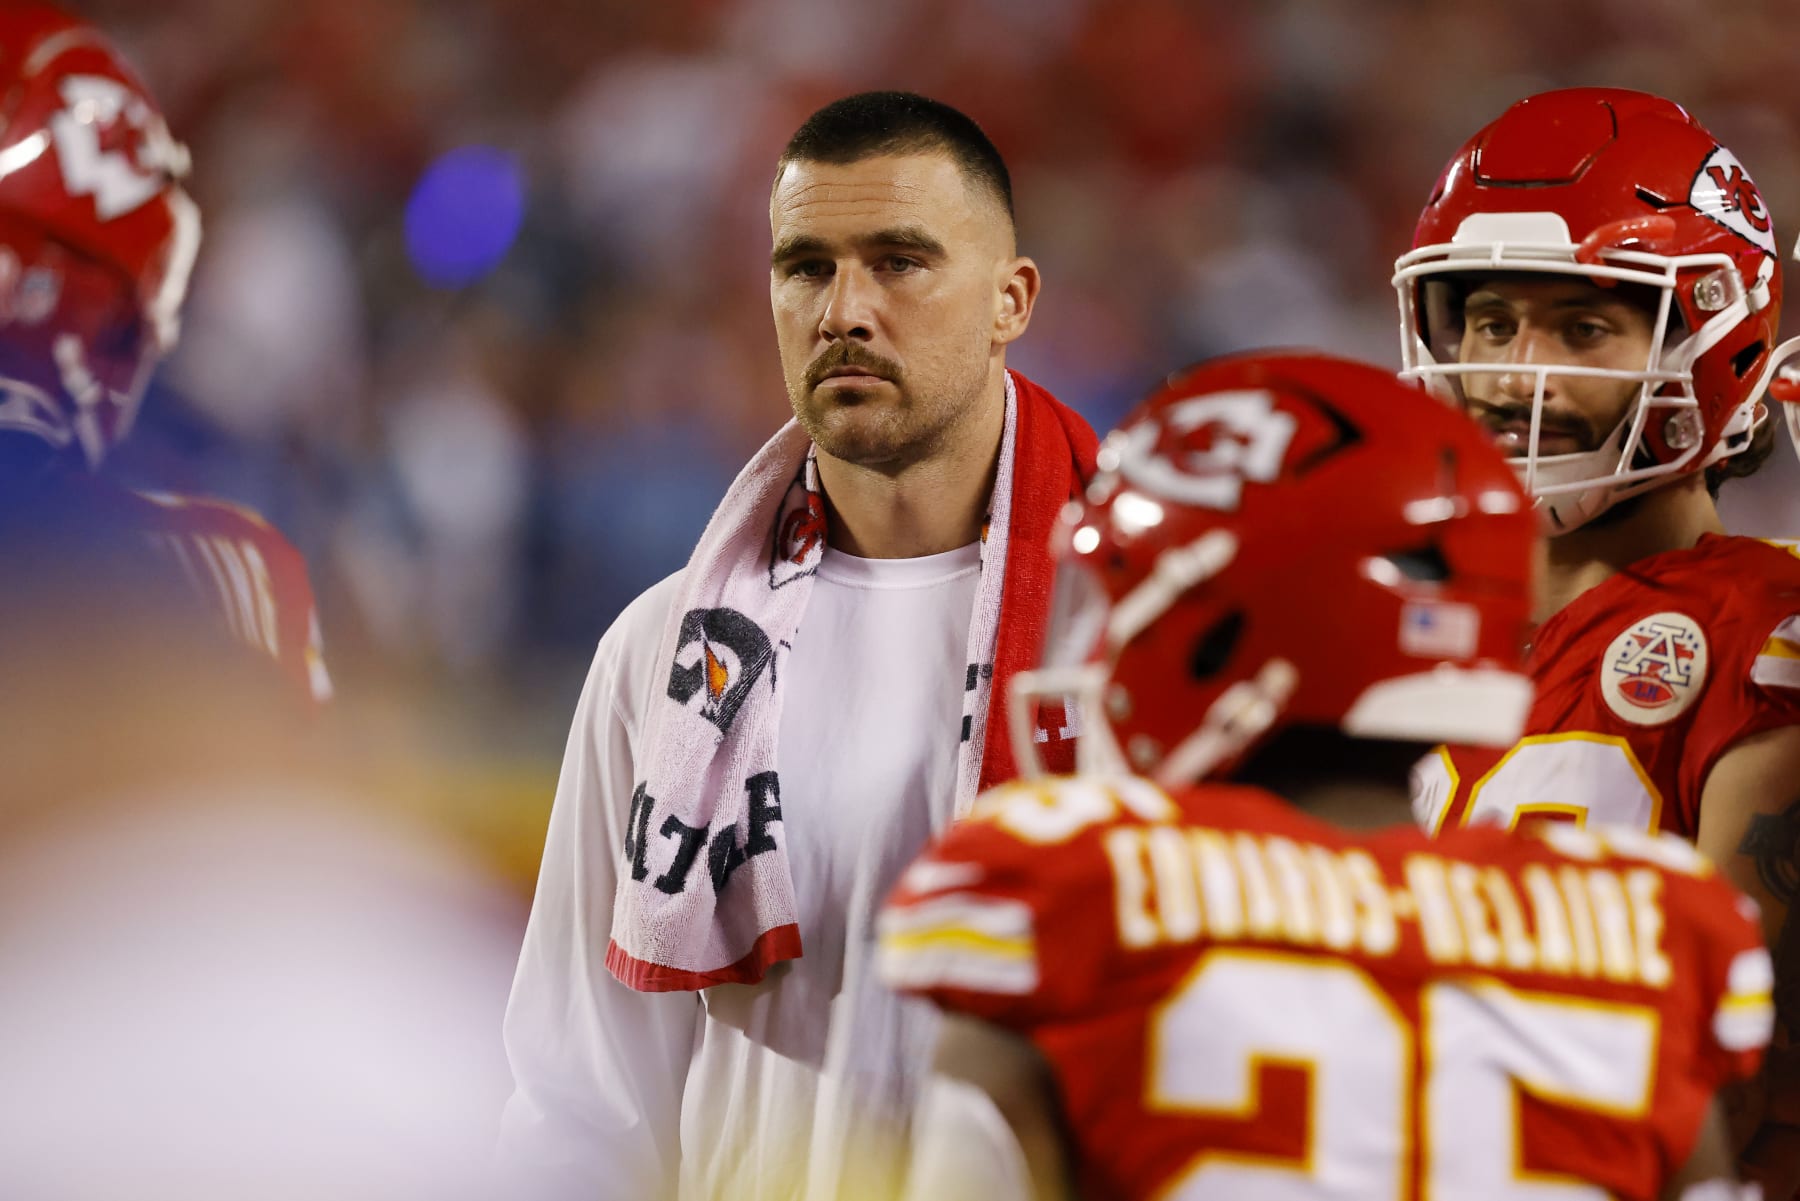 Chiefs Travis Kelce suffered a knee injury during Tuesday's practice